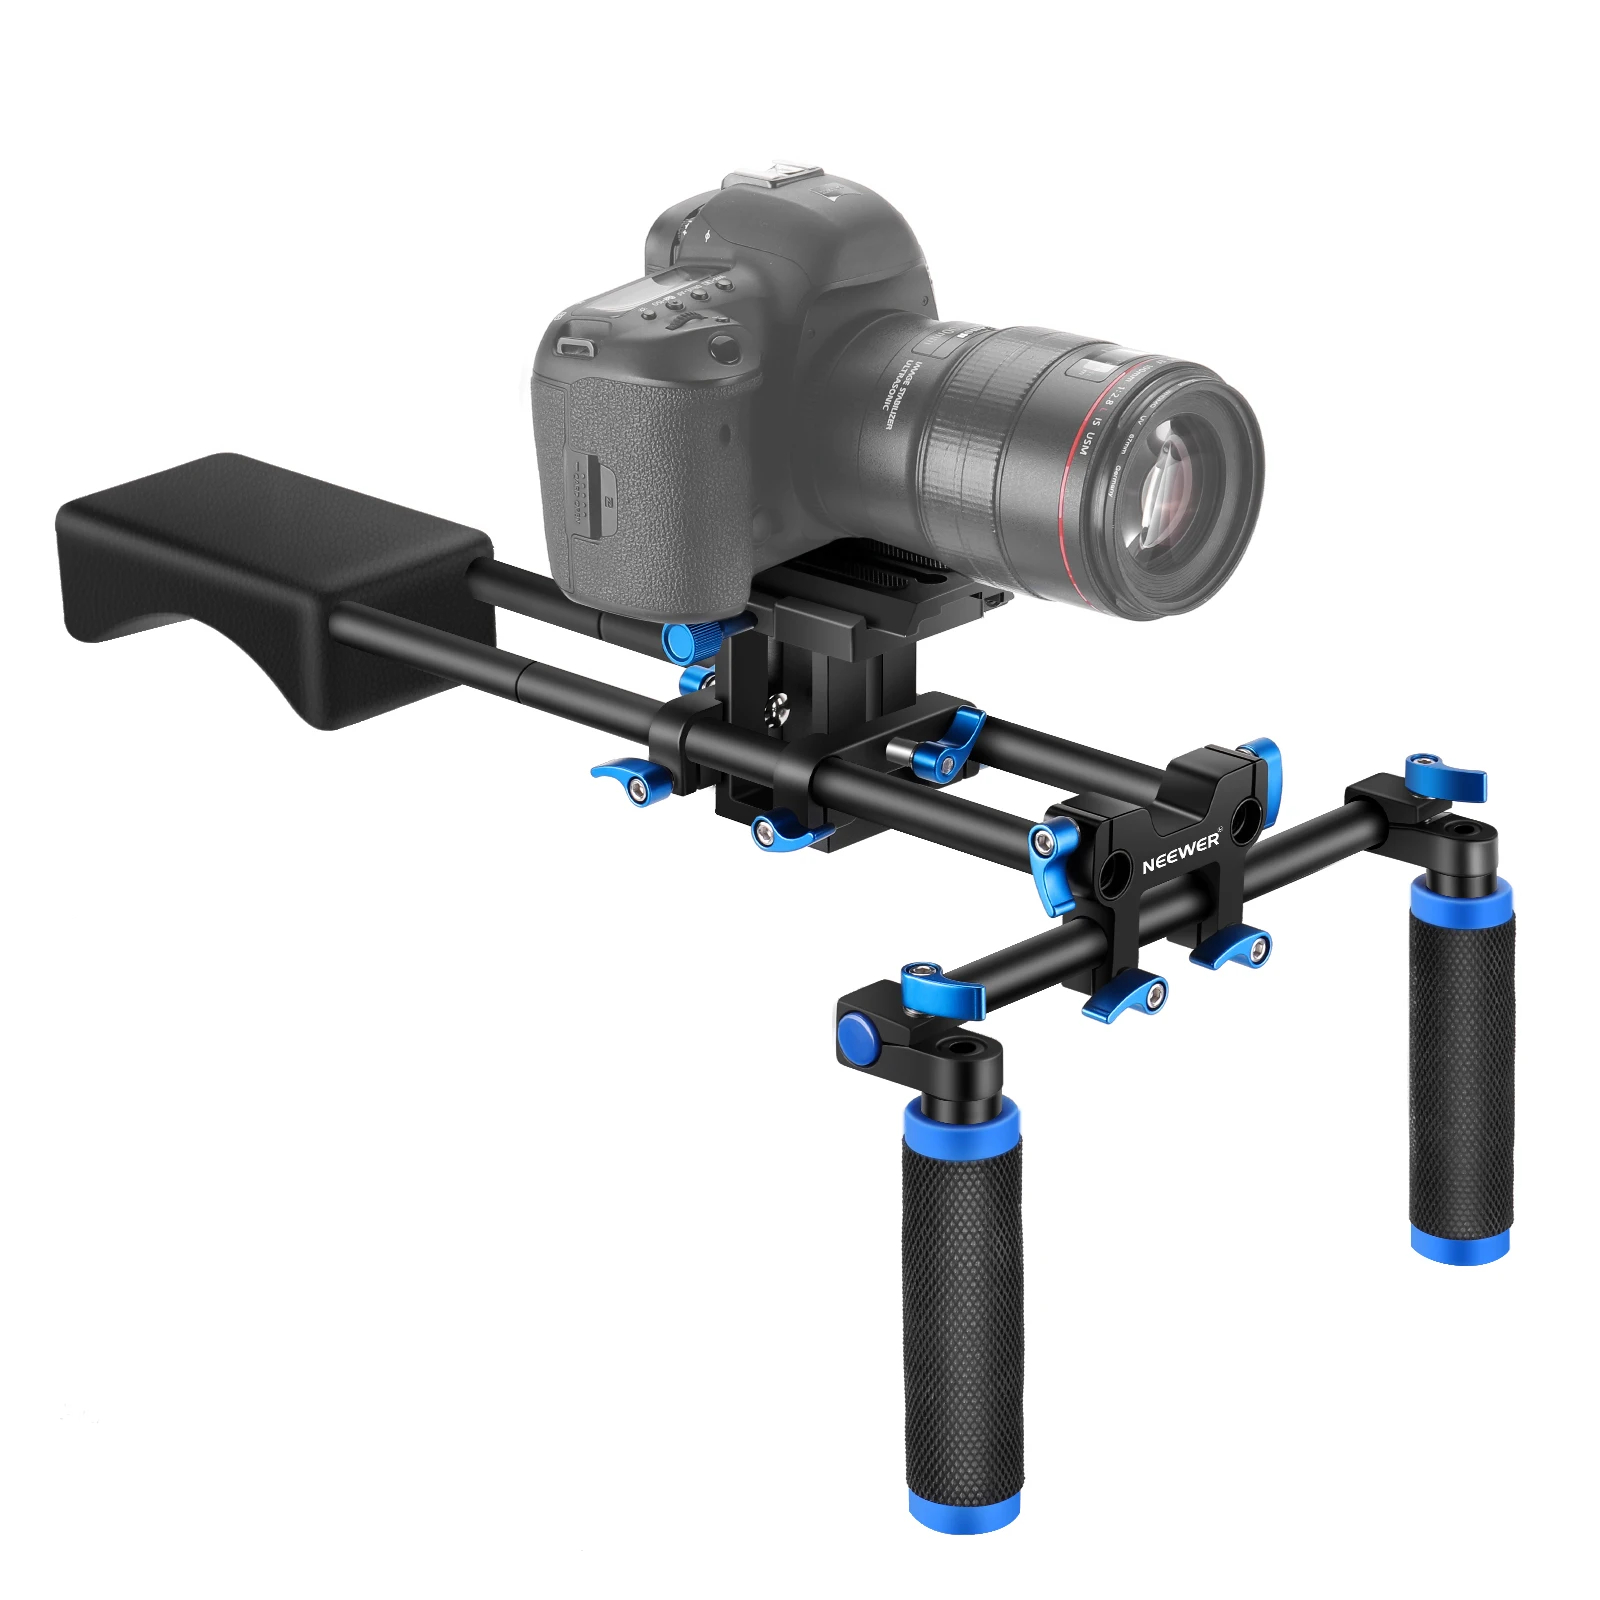 Neewer Portable FilmMaker System With Mount Slider, Soft Rubber Shoulder Pad and Dual-hand Handgrip For All DSLR Video Cameras